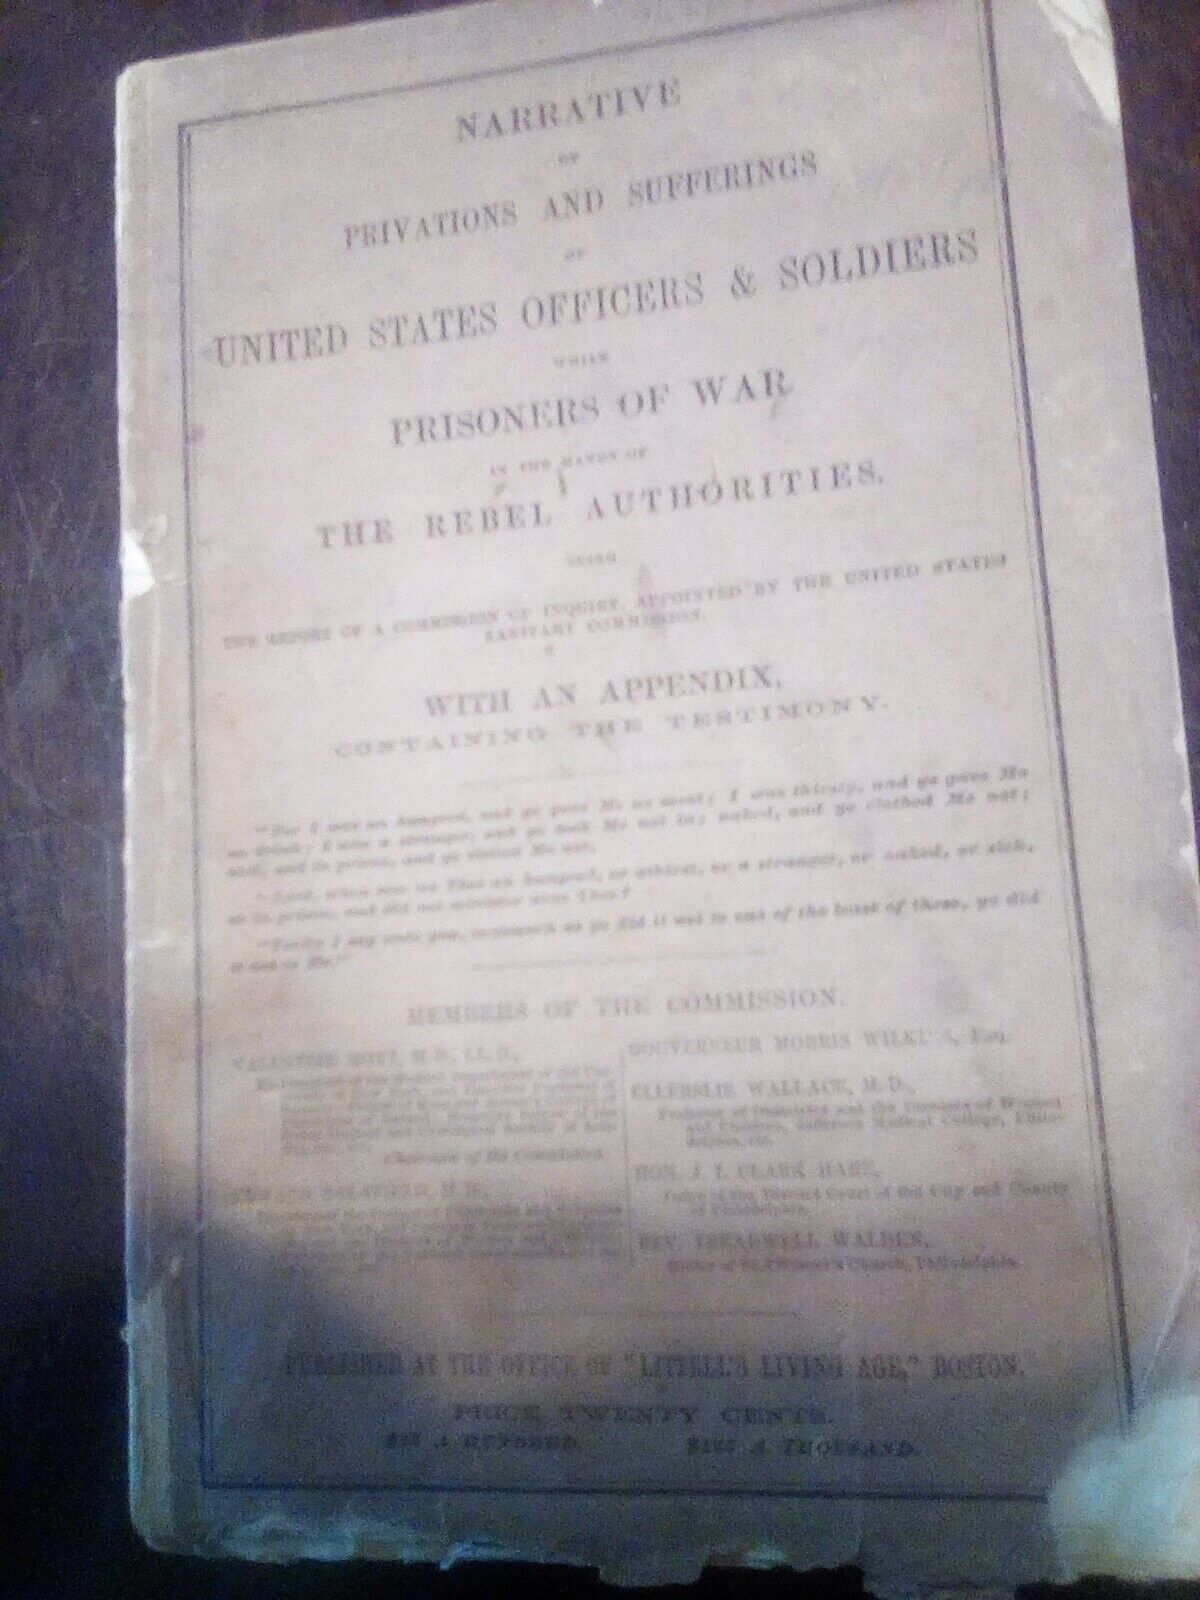 Narrative of privations and sufferings of United States officers and soldiers wh